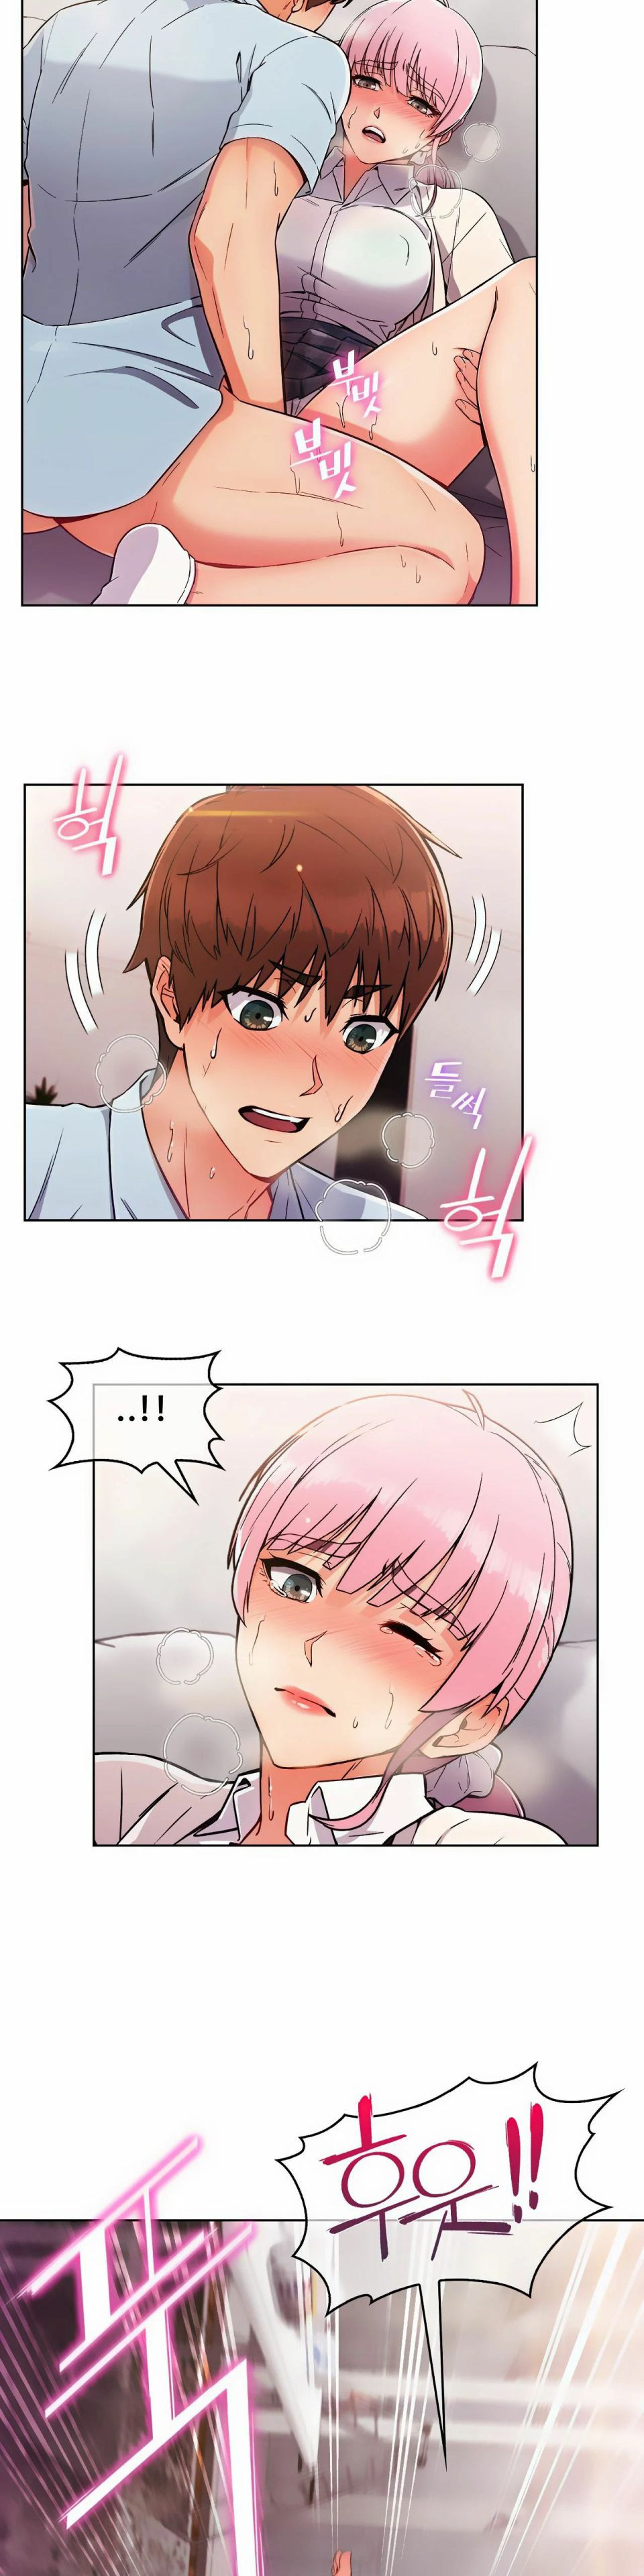 Sincere Minhyuk Raw - Chapter 3 Page 13